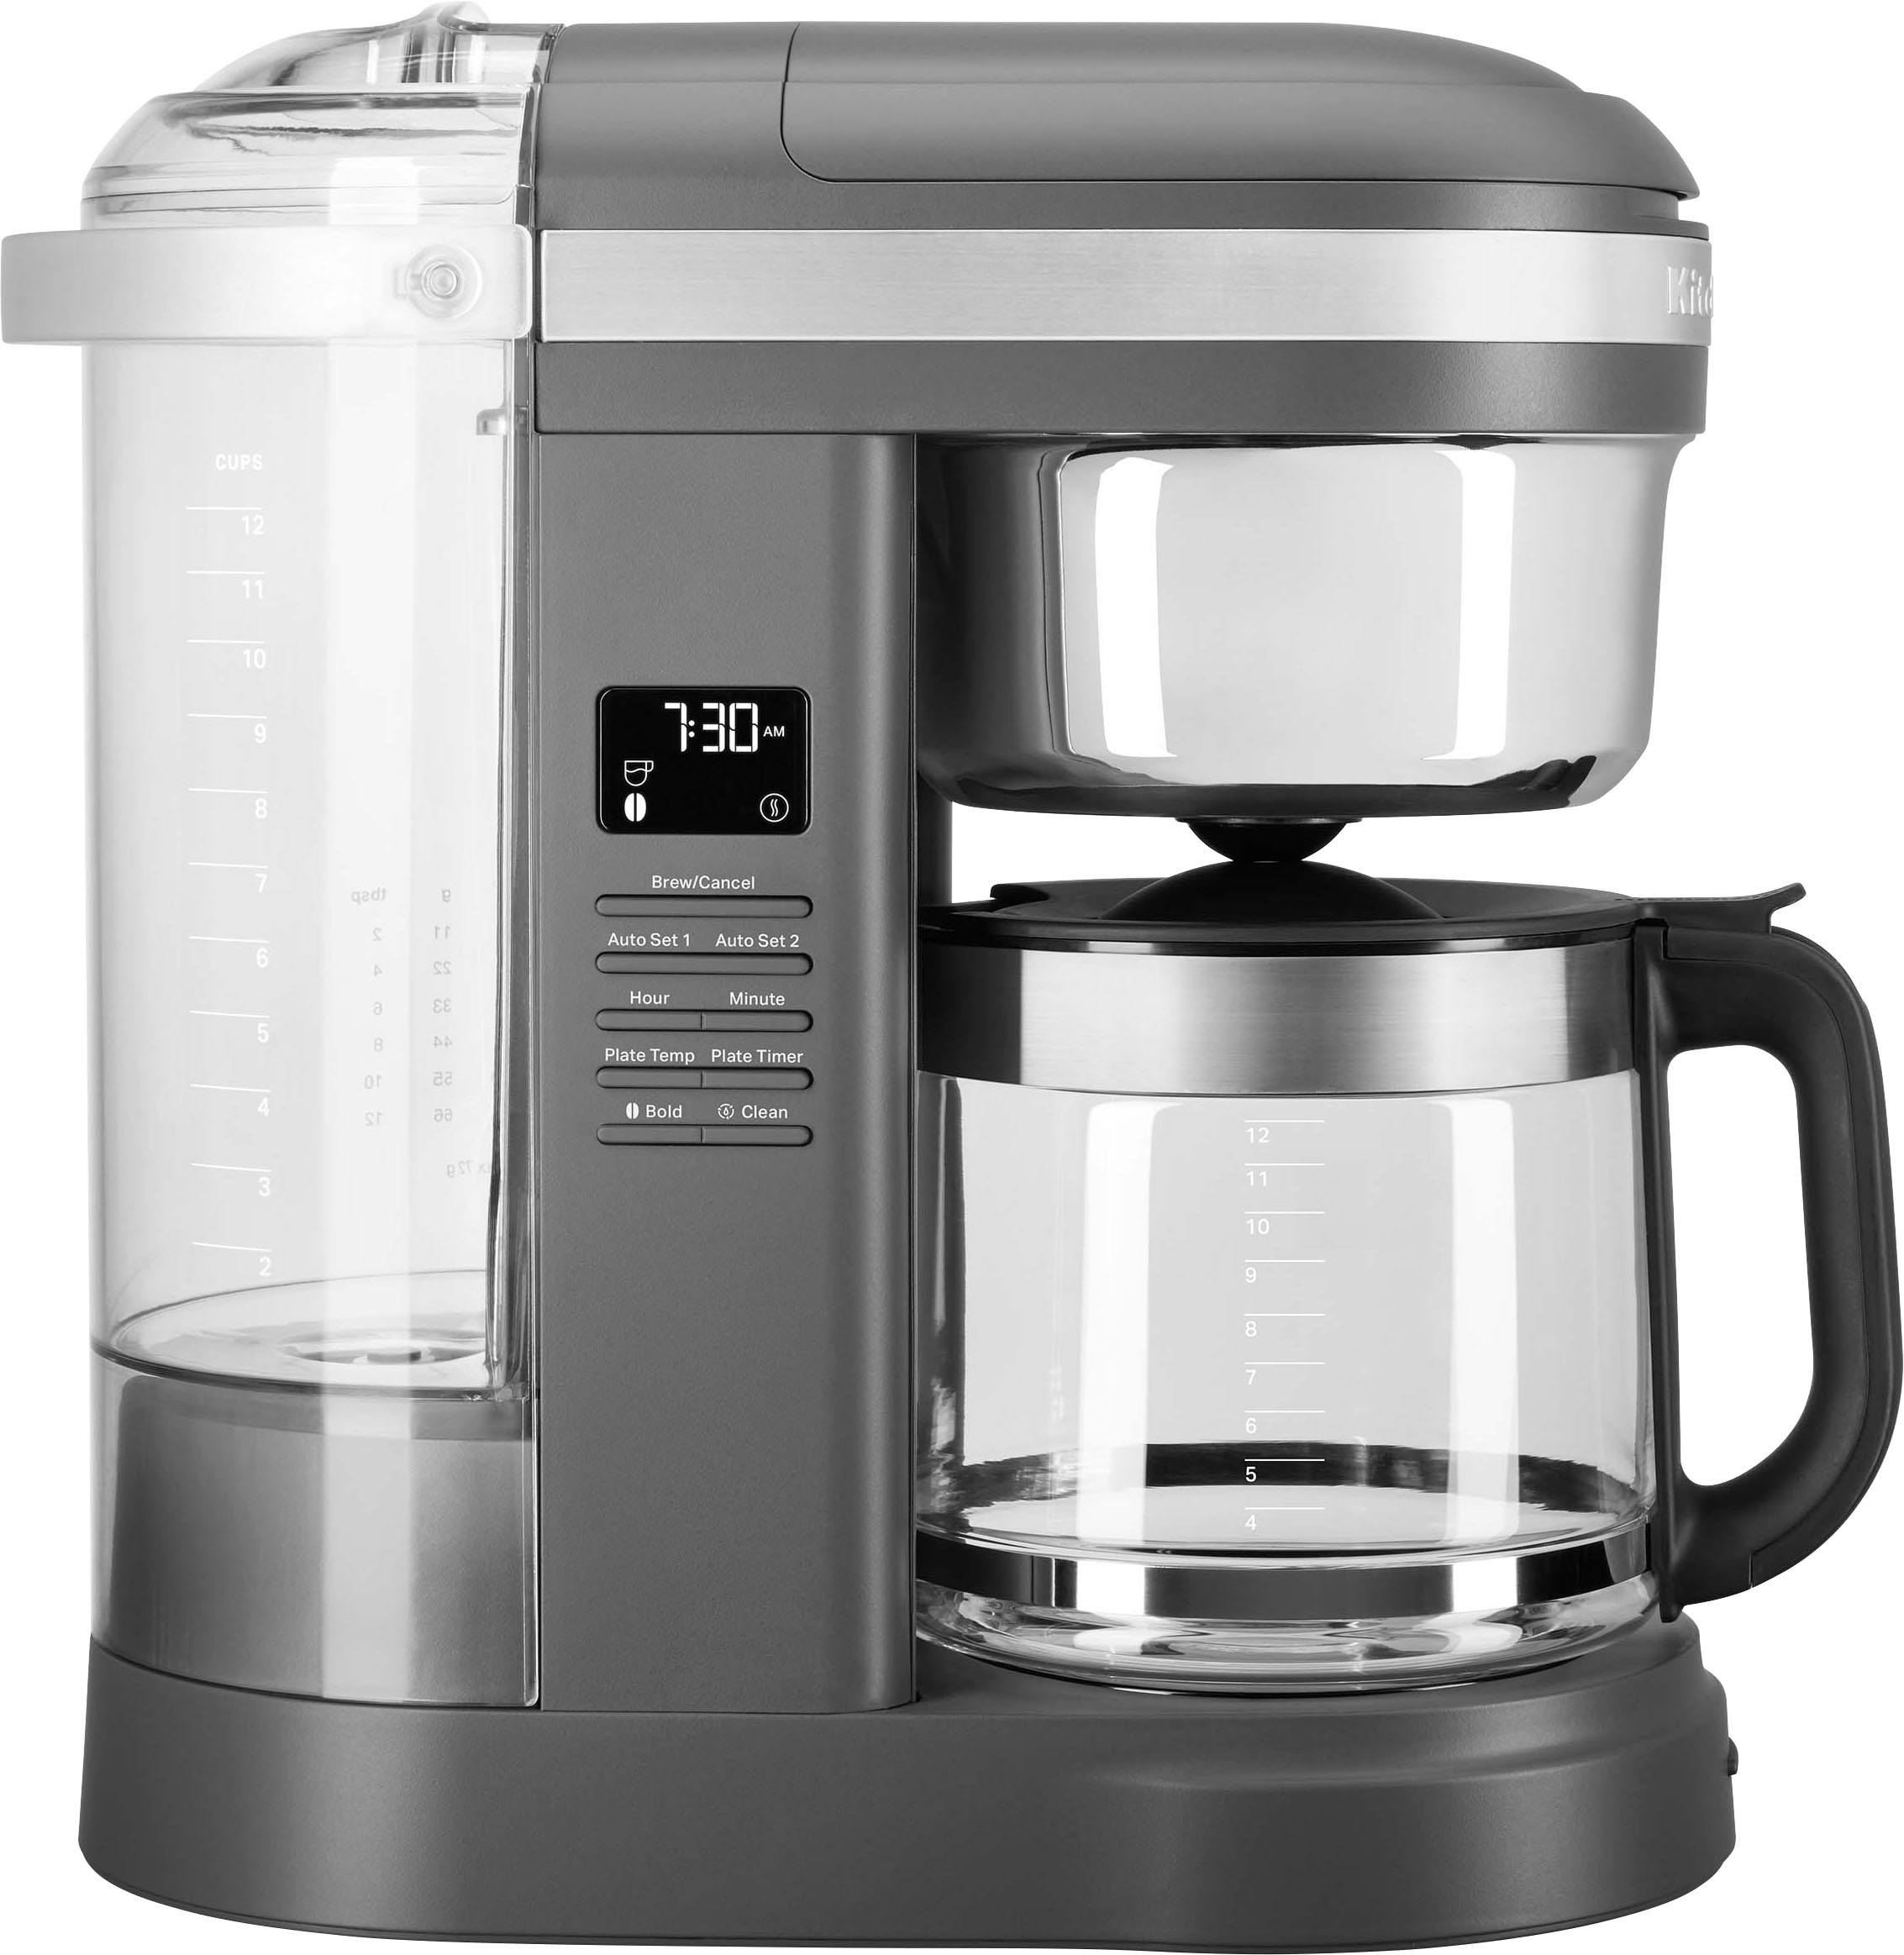 KitchenAid KCM1209DG 12 Cup Drip Coffee Maker With Spiral Showerhead Gray  Tested